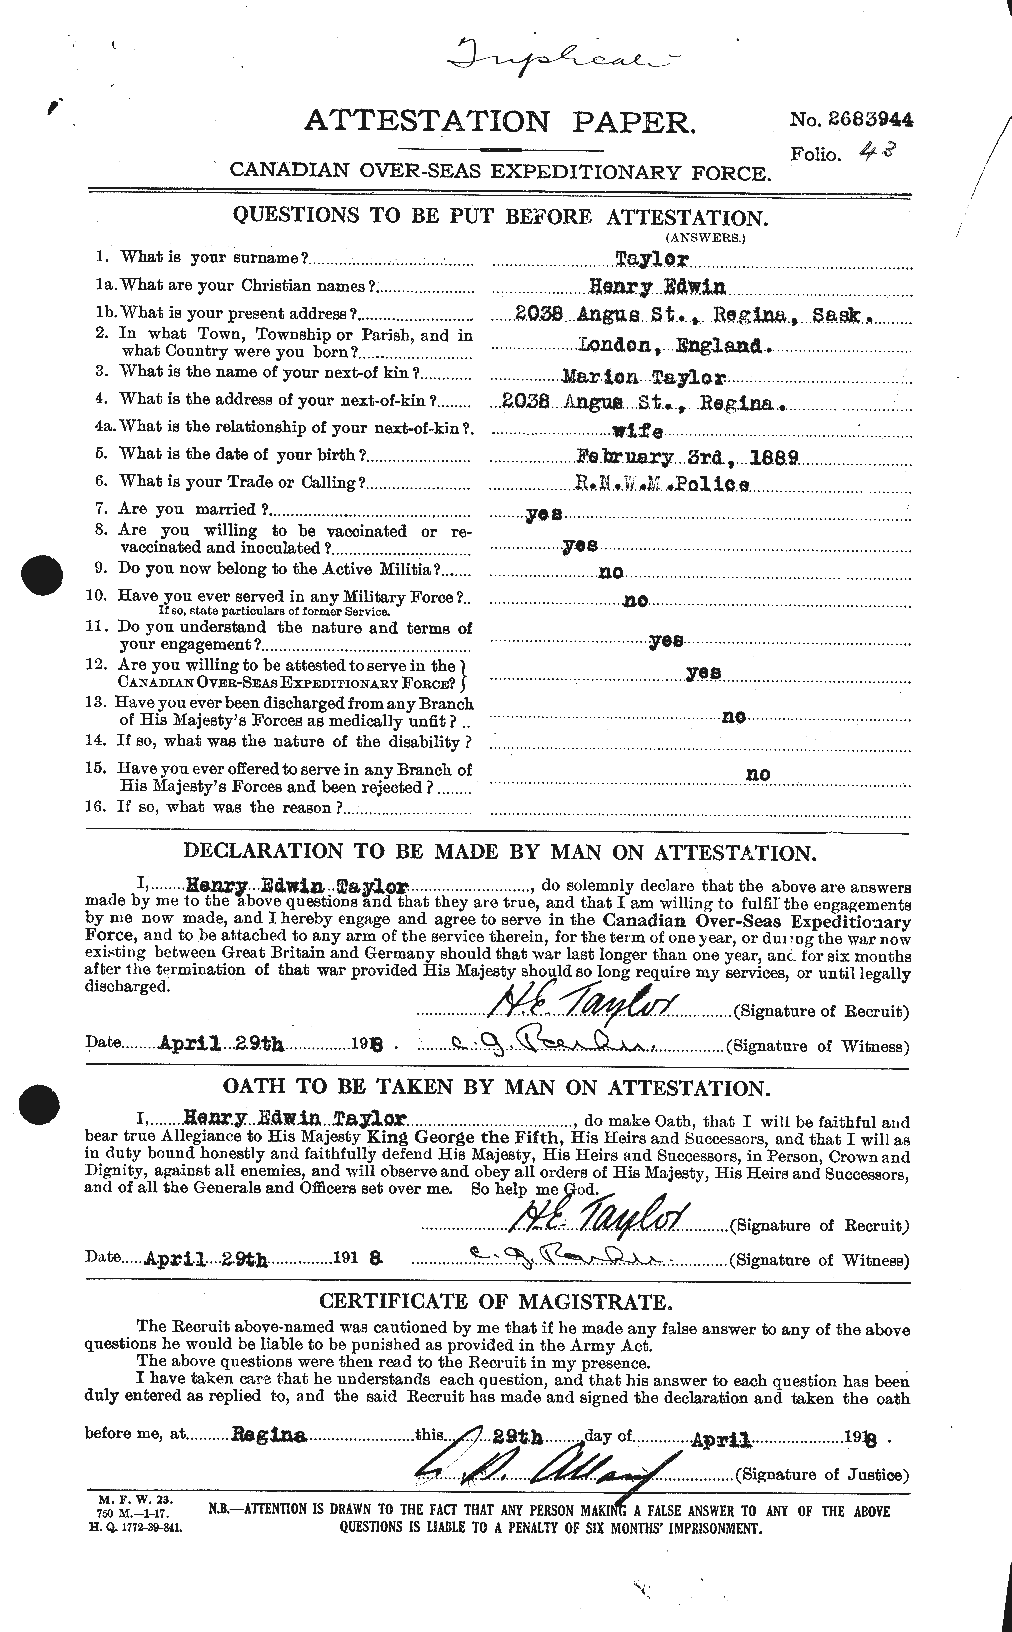 Personnel Records of the First World War - CEF 626536a